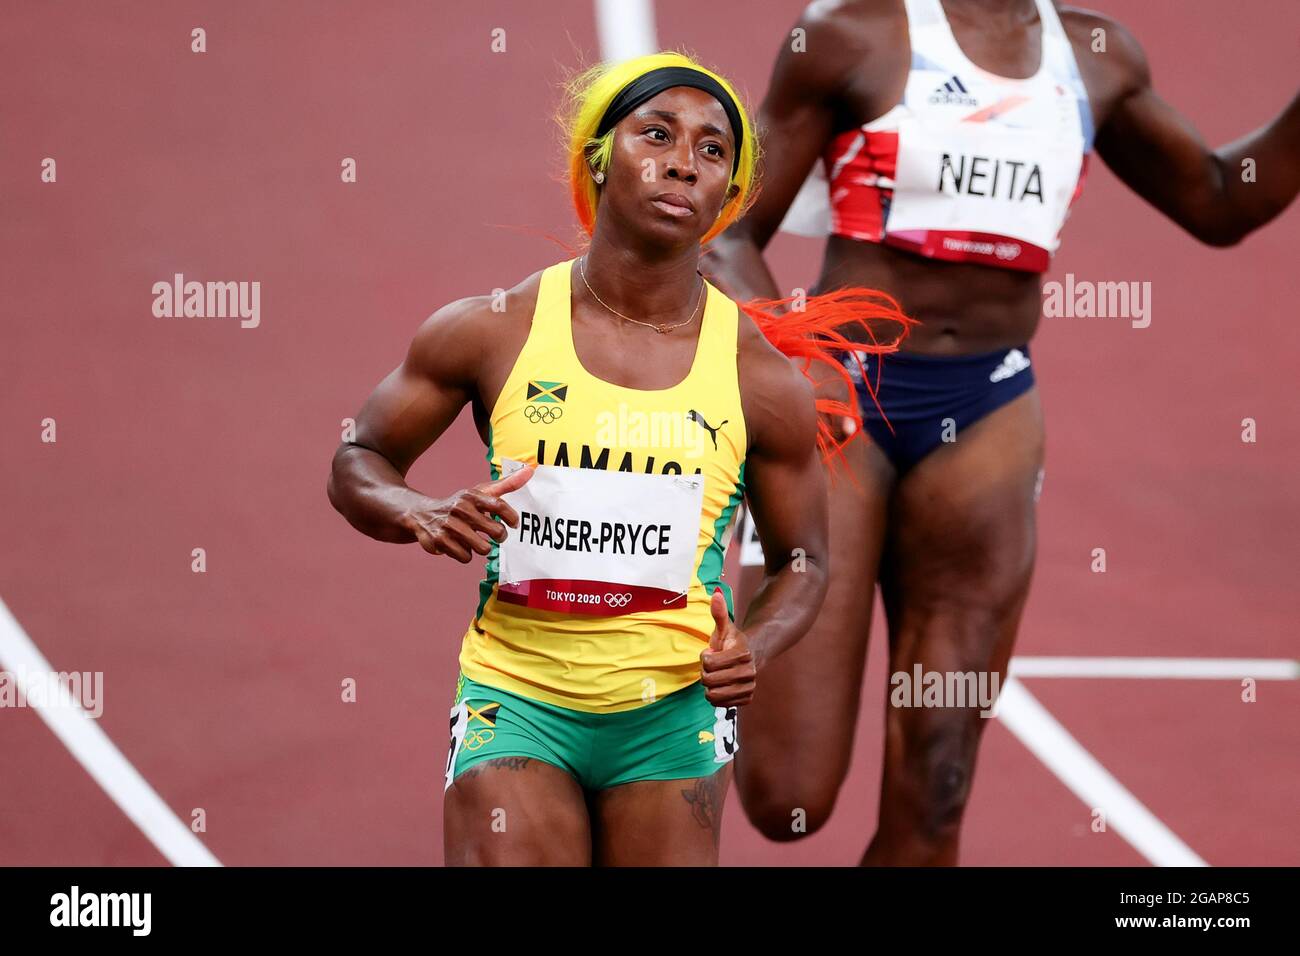 Tokyo, Japan, 31 July, 2021. Shelly-Ann Fraser-Pryce of Team Jamaica wins her Women's 100m Semifinal on Day 8 of the Tokyo 2020 Olympic Games. Credit: Pete Dovgan/Speed Media/Alamy Live News. Credit: Pete Dovgan/Speed Media/Alamy Live News Stock Photo